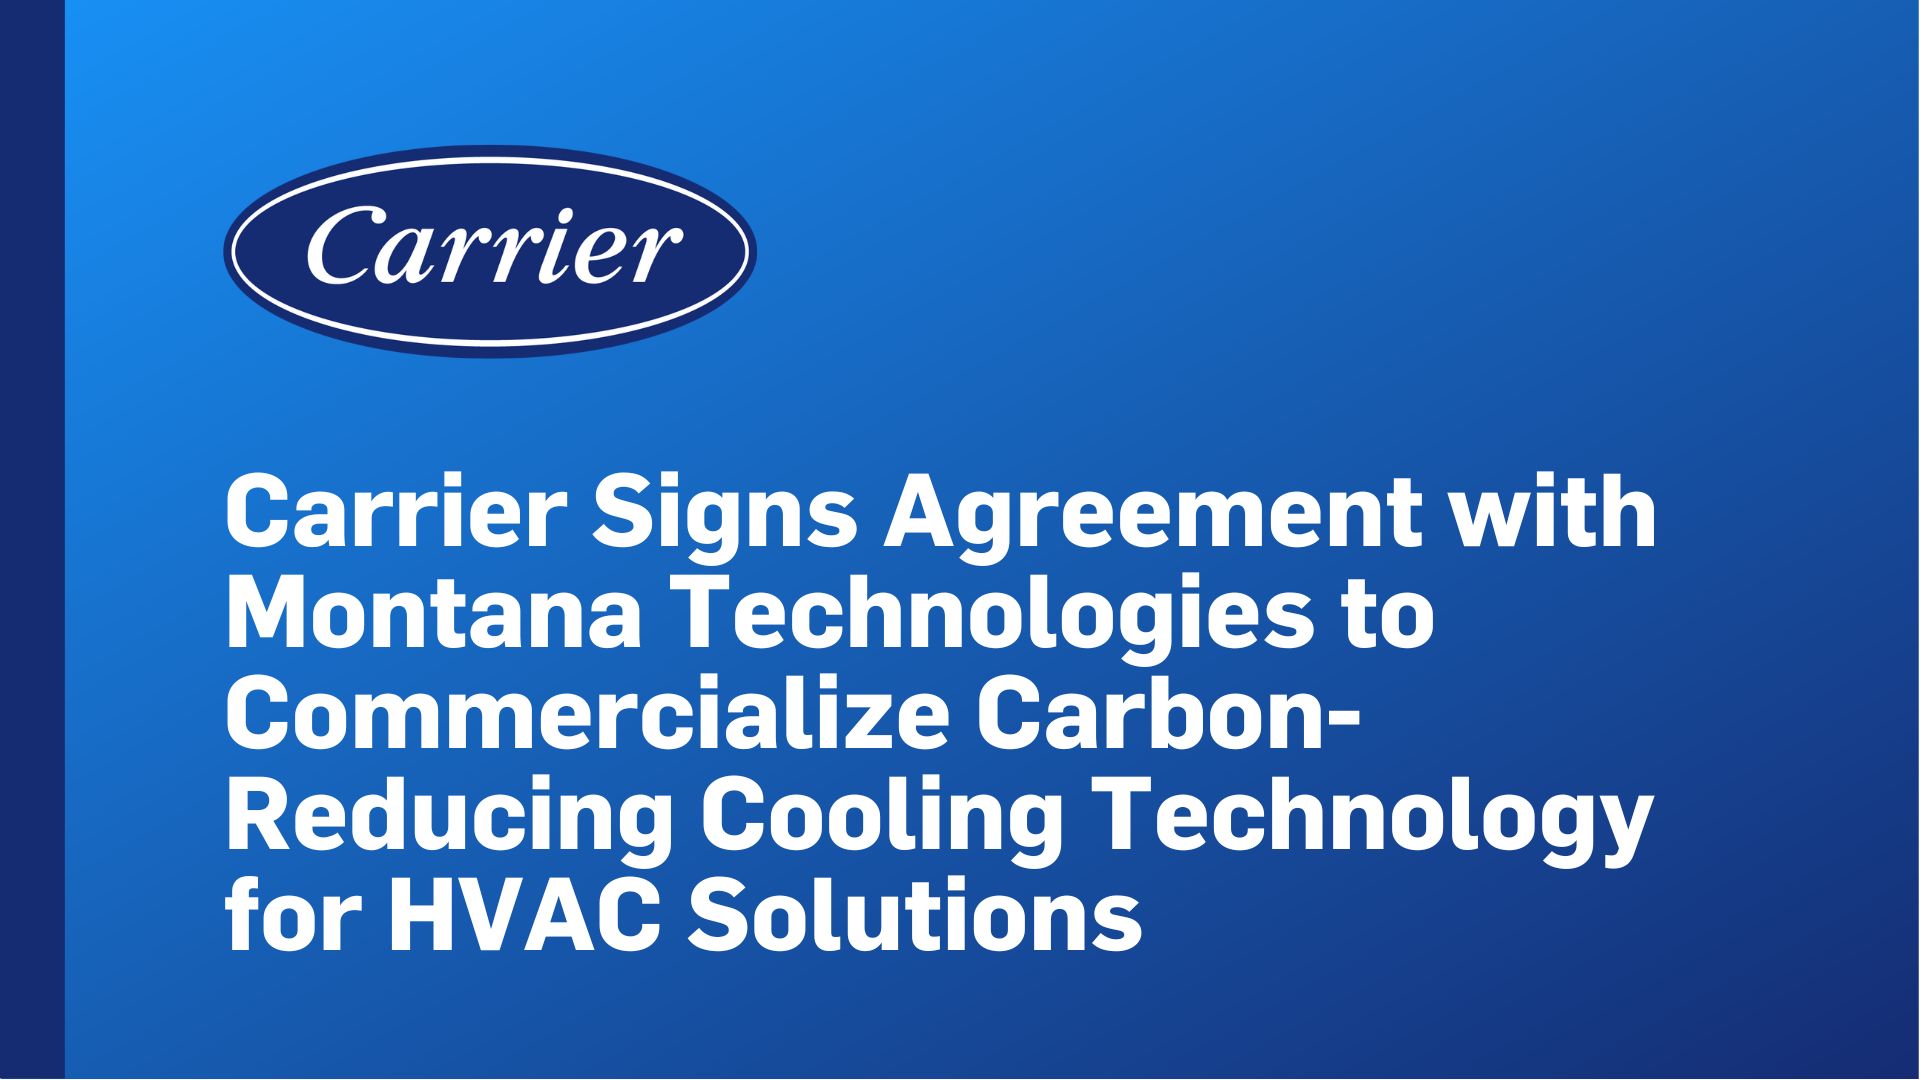 Montana_Technologies_to_Commercialize_Carbon-Reducing_Cooling_Technology_for_HVAC_Solutions 